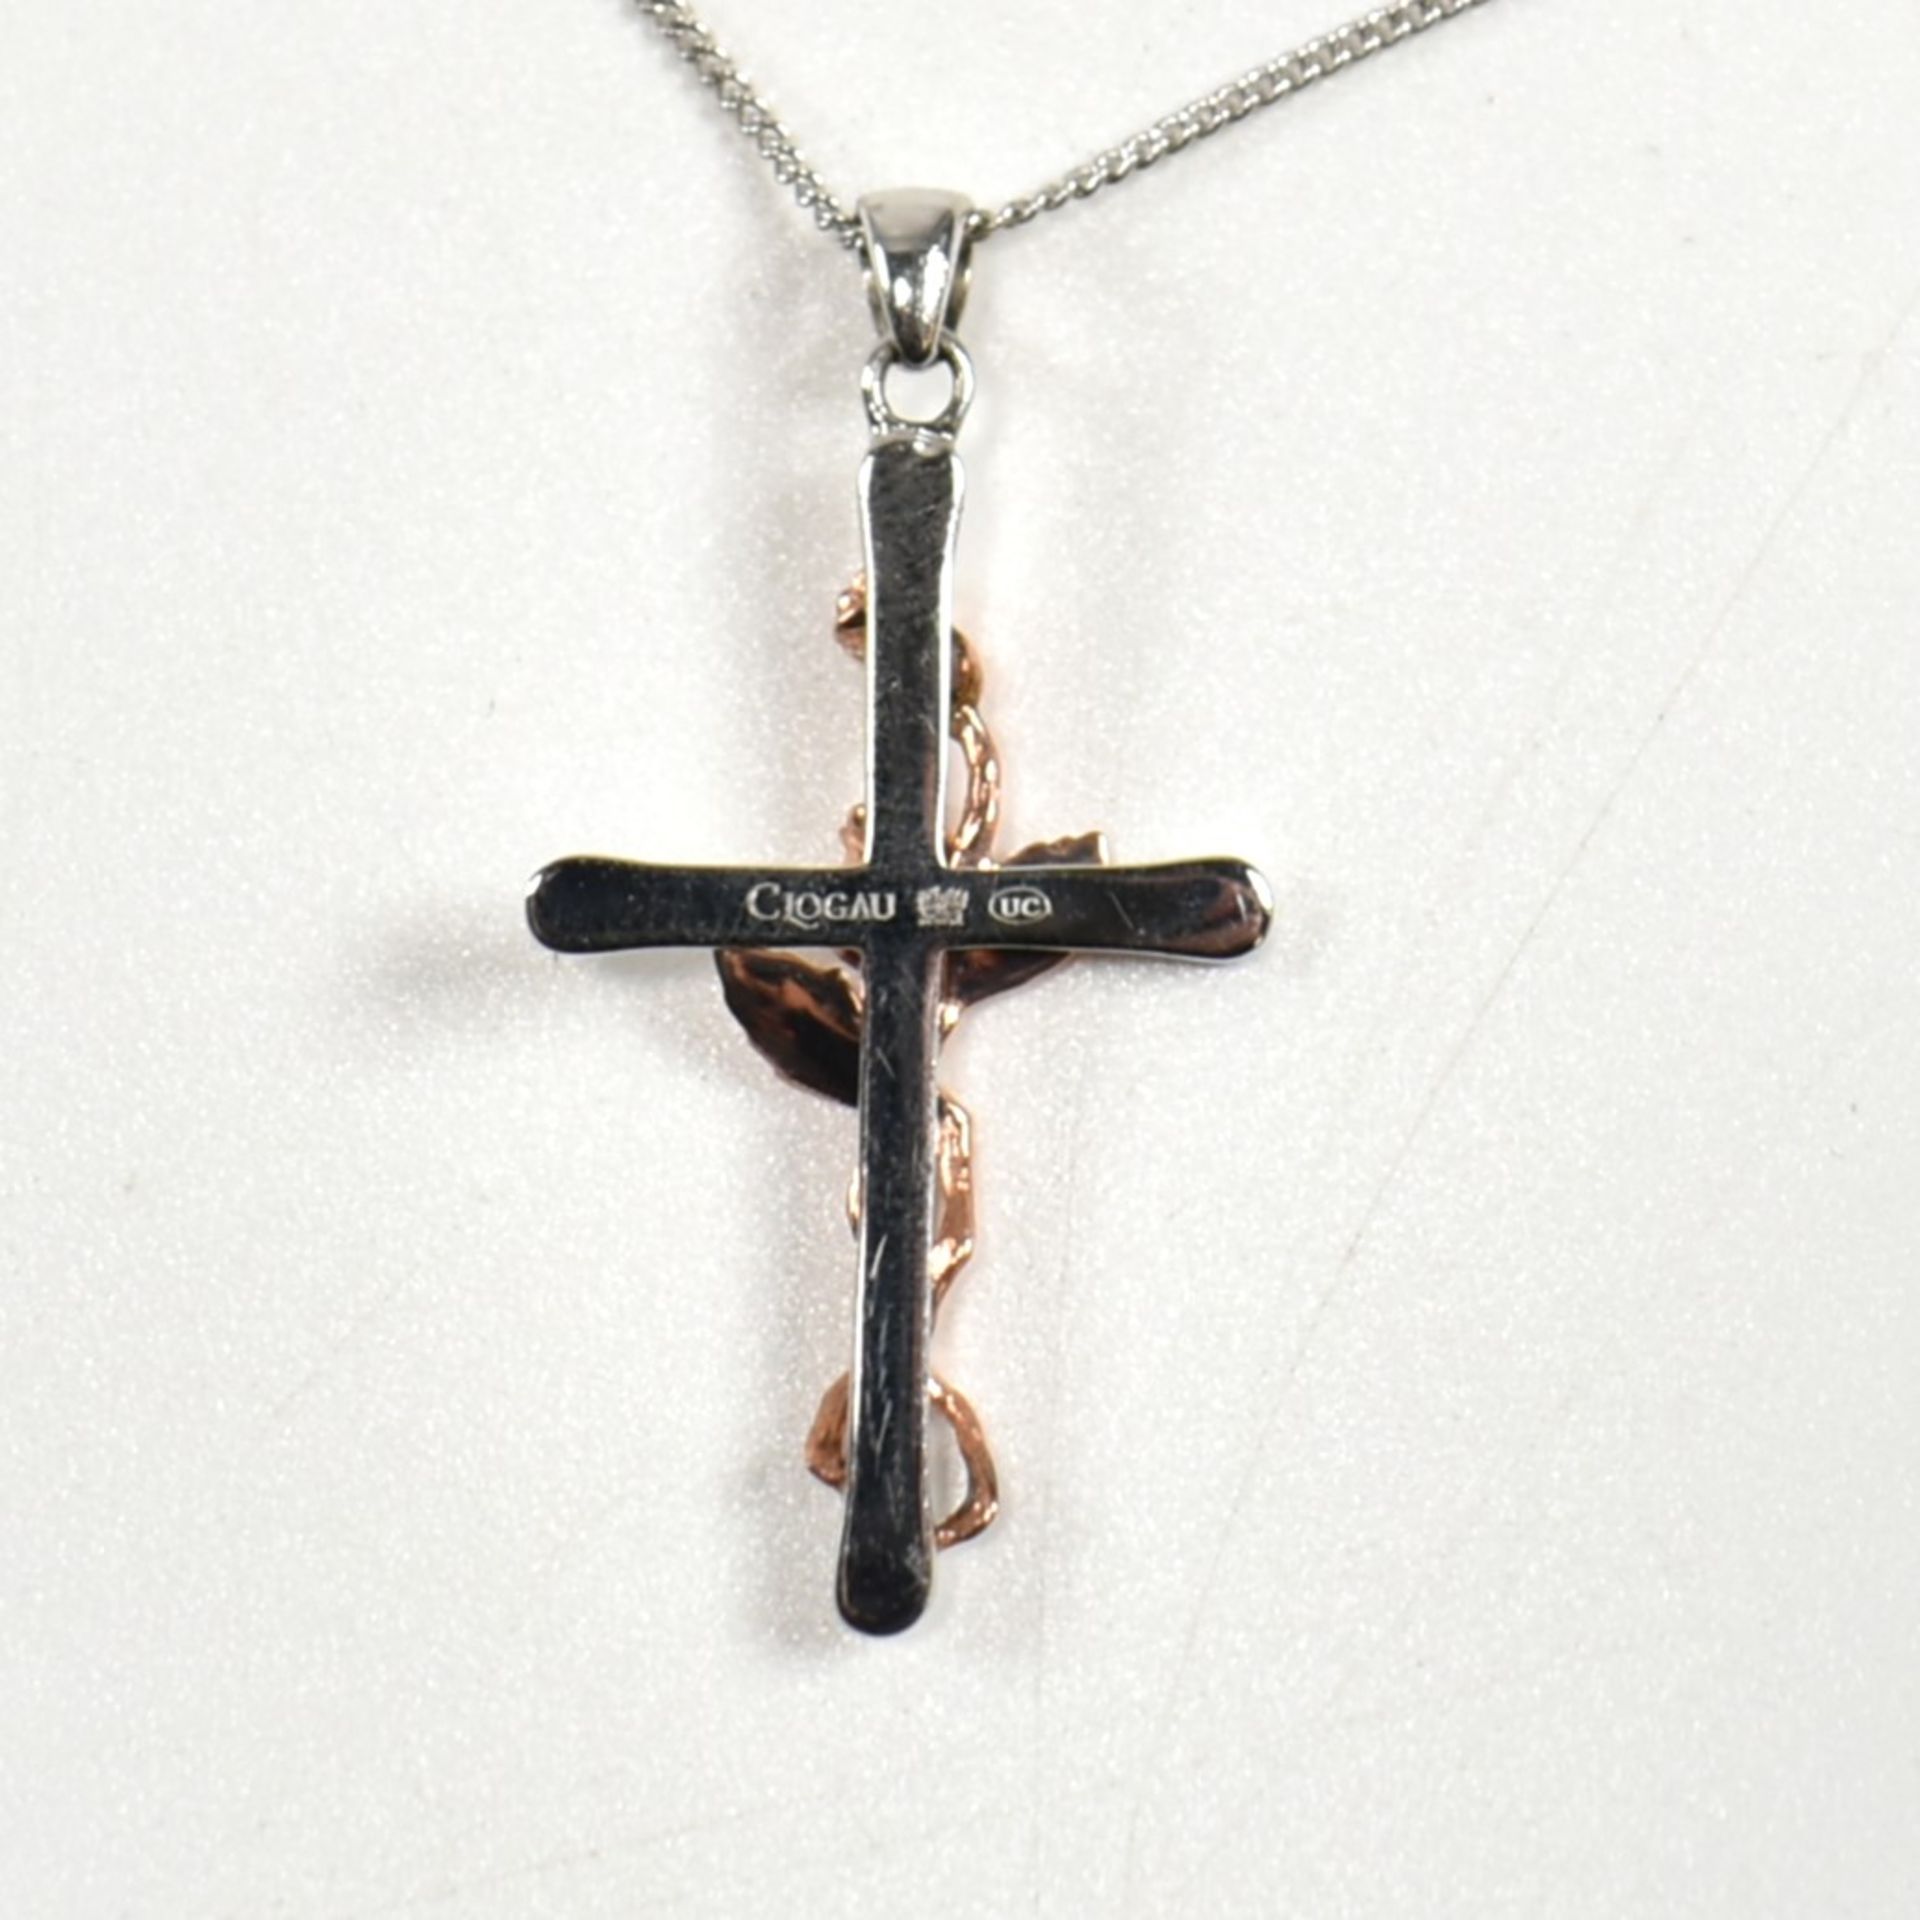 HALLMARKED SILVER & ROSE GOLD CLOGAU CROSS PENDANT NECKLACE - Image 2 of 5